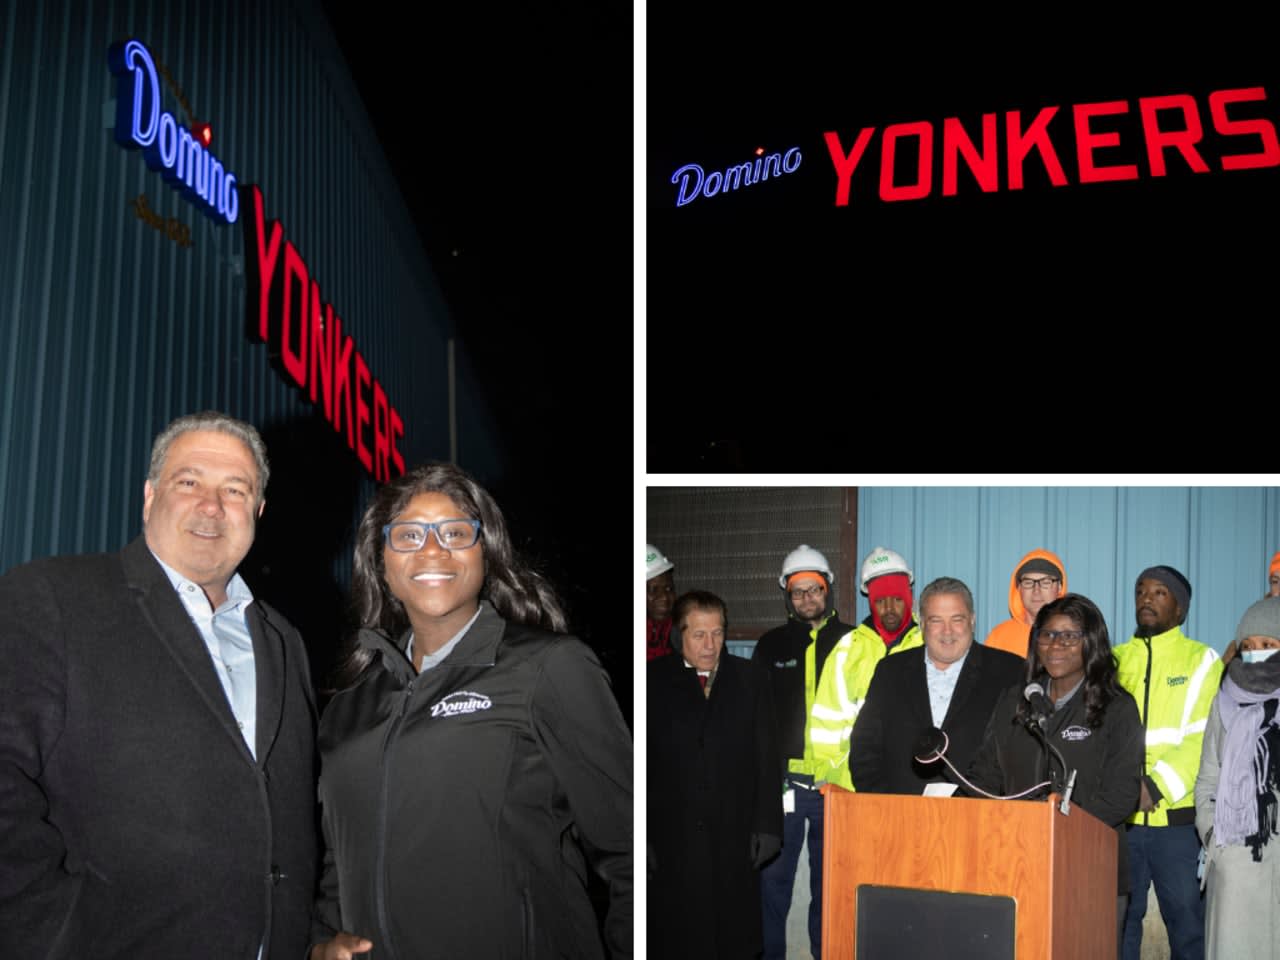 Yonkers Mayor Mike Spano attends the first lighting of the new Domino Sugar Refinery LED sign that pays homage to the iconic sign on the city's waterfront pier.